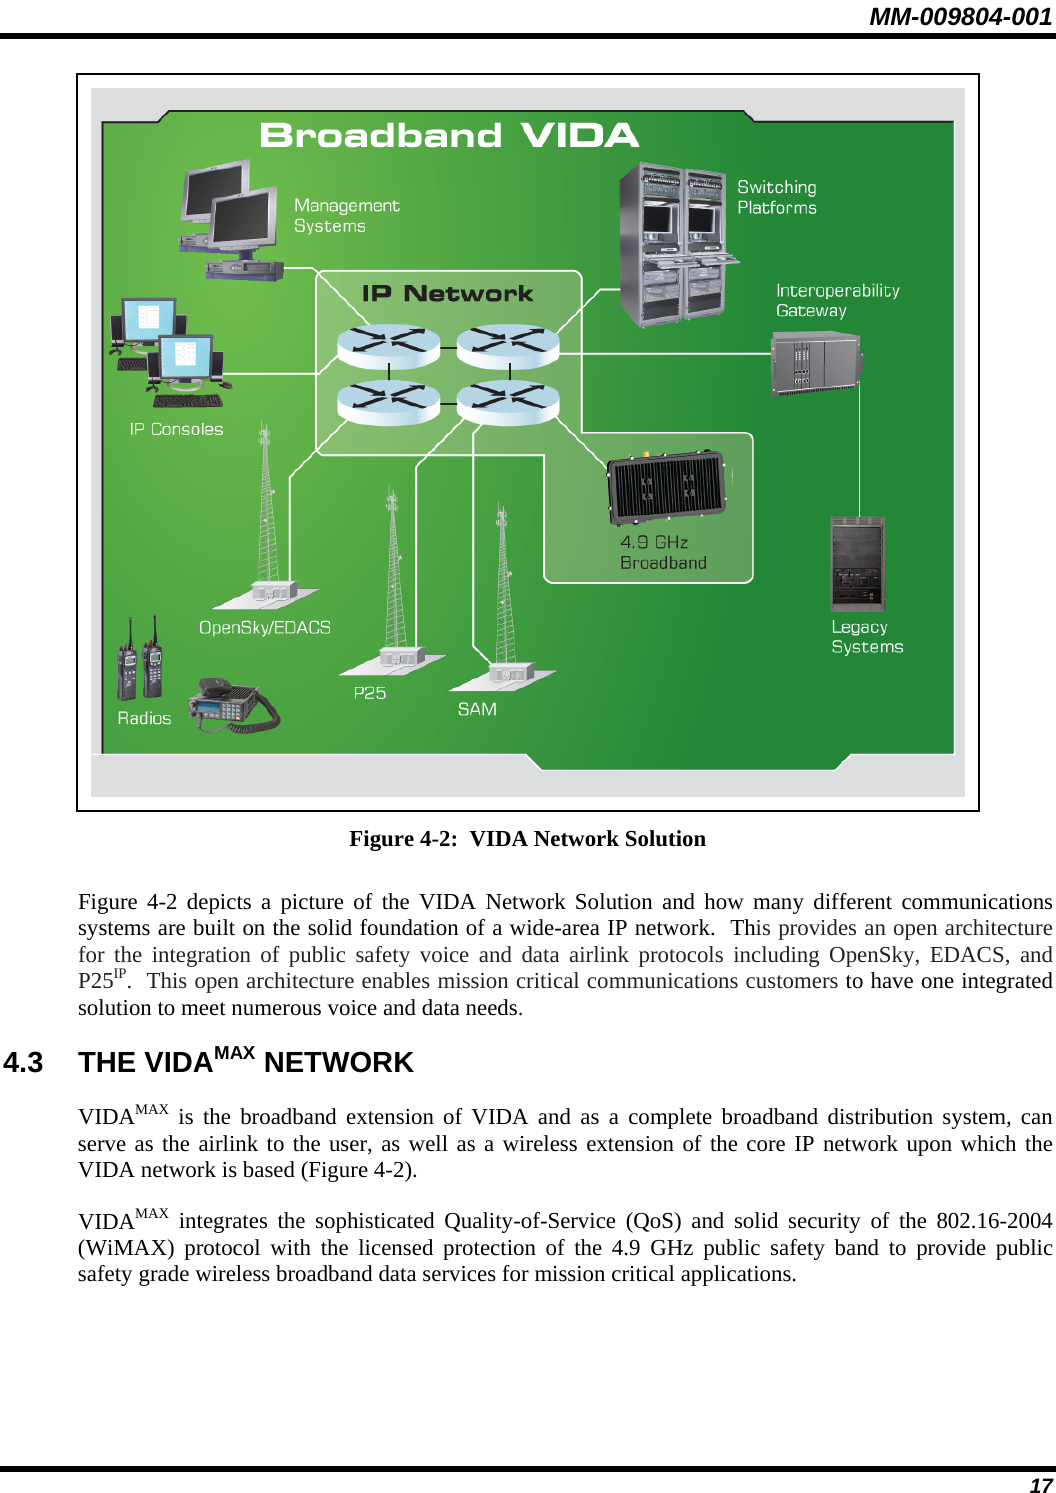 MM-009804-001  Figure 4-2:  VIDA Network Solution  Figure 4-2 depicts a picture of the VIDA Network Solution and how many different communications systems are built on the solid foundation of a wide-area IP network.  This provides an open architecture for the integration of public safety voice and data airlink protocols including OpenSky, EDACS, and P25IP.  This open architecture enables mission critical communications customers to have one integrated solution to meet numerous voice and data needs.   4.3 THE VIDAMAX NETWORK VIDAMAX is the broadband extension of VIDA and as a complete broadband distribution system, can serve as the airlink to the user, as well as a wireless extension of the core IP network upon which the VIDA network is based (Figure 4-2).  VIDAMAX integrates the sophisticated Quality-of-Service (QoS) and solid security of the 802.16-2004 (WiMAX) protocol with the licensed protection of the 4.9 GHz public safety band to provide public safety grade wireless broadband data services for mission critical applications.    17 